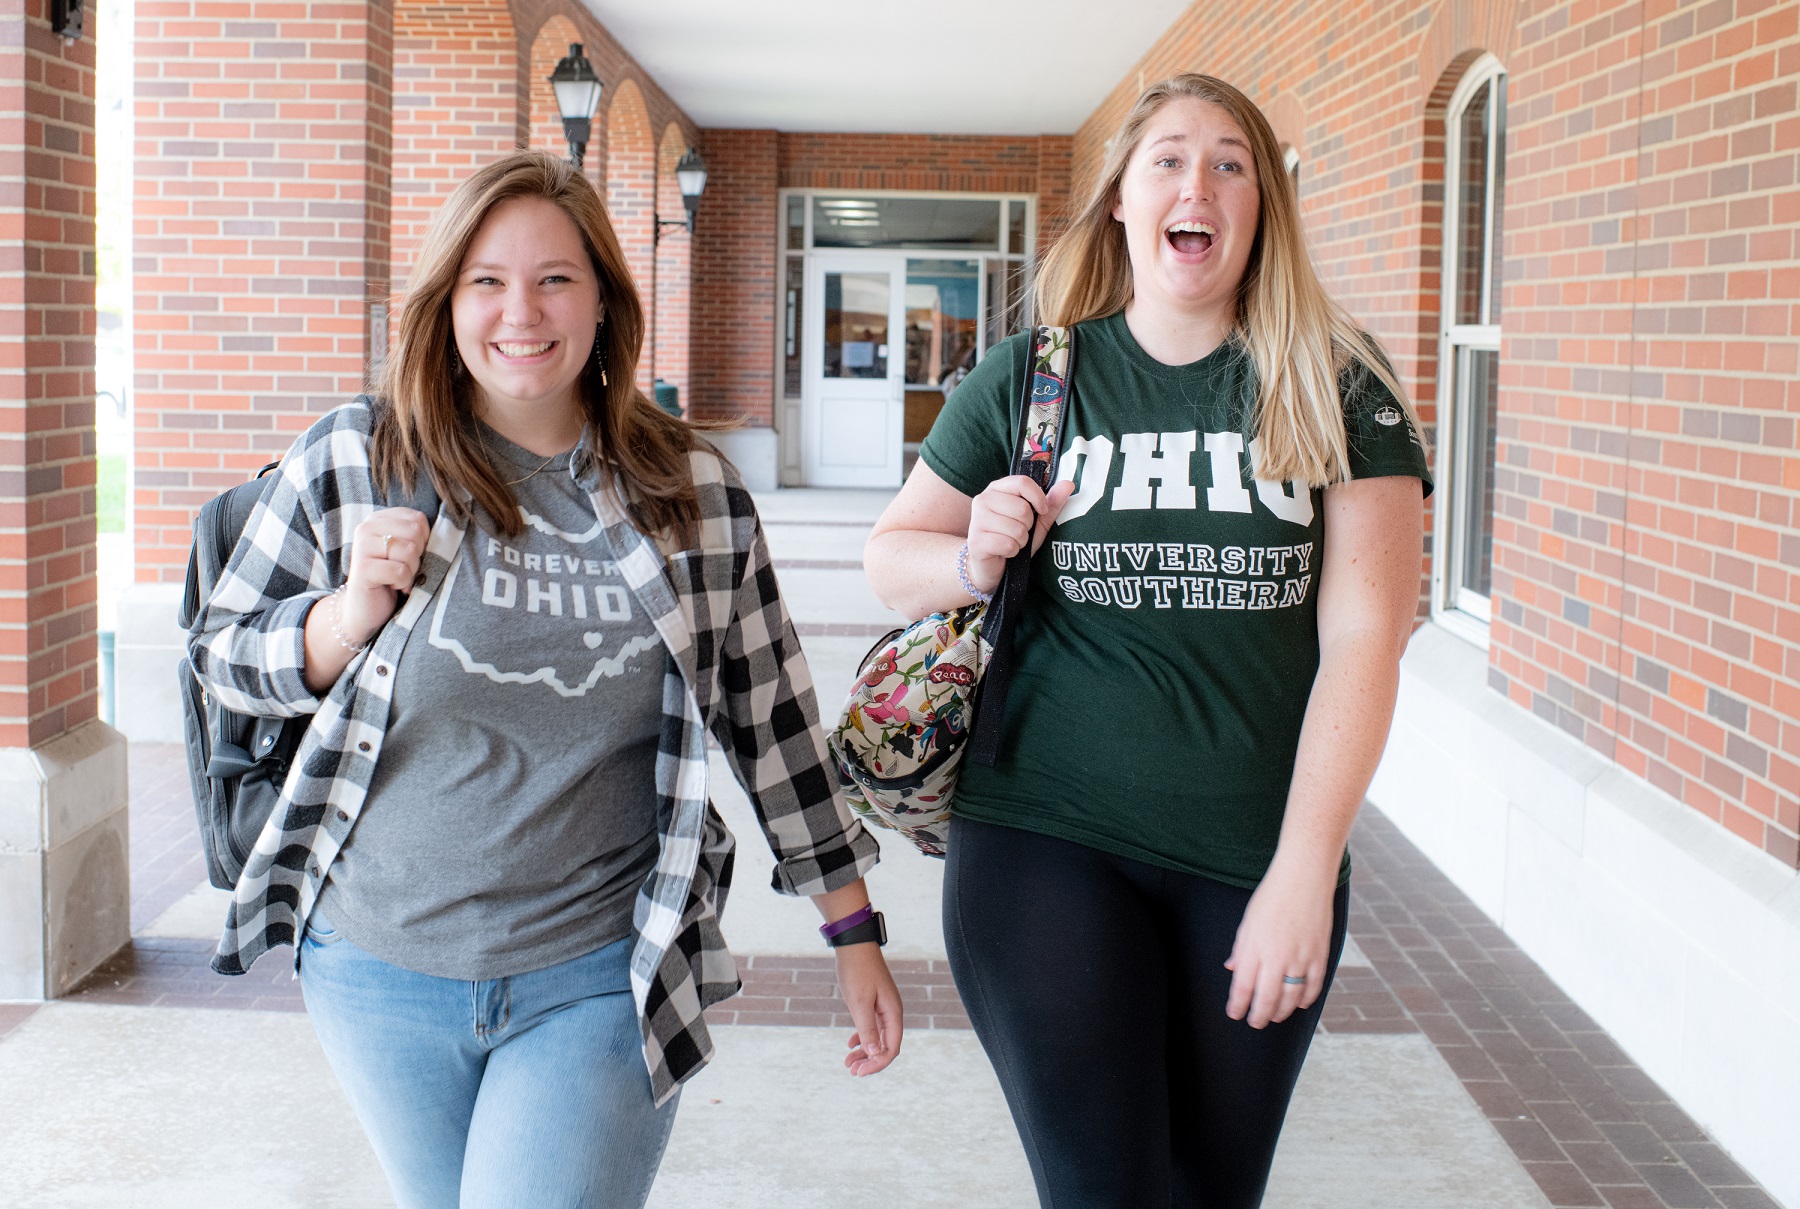 Two Ohio University students are shown outside an OHIO building